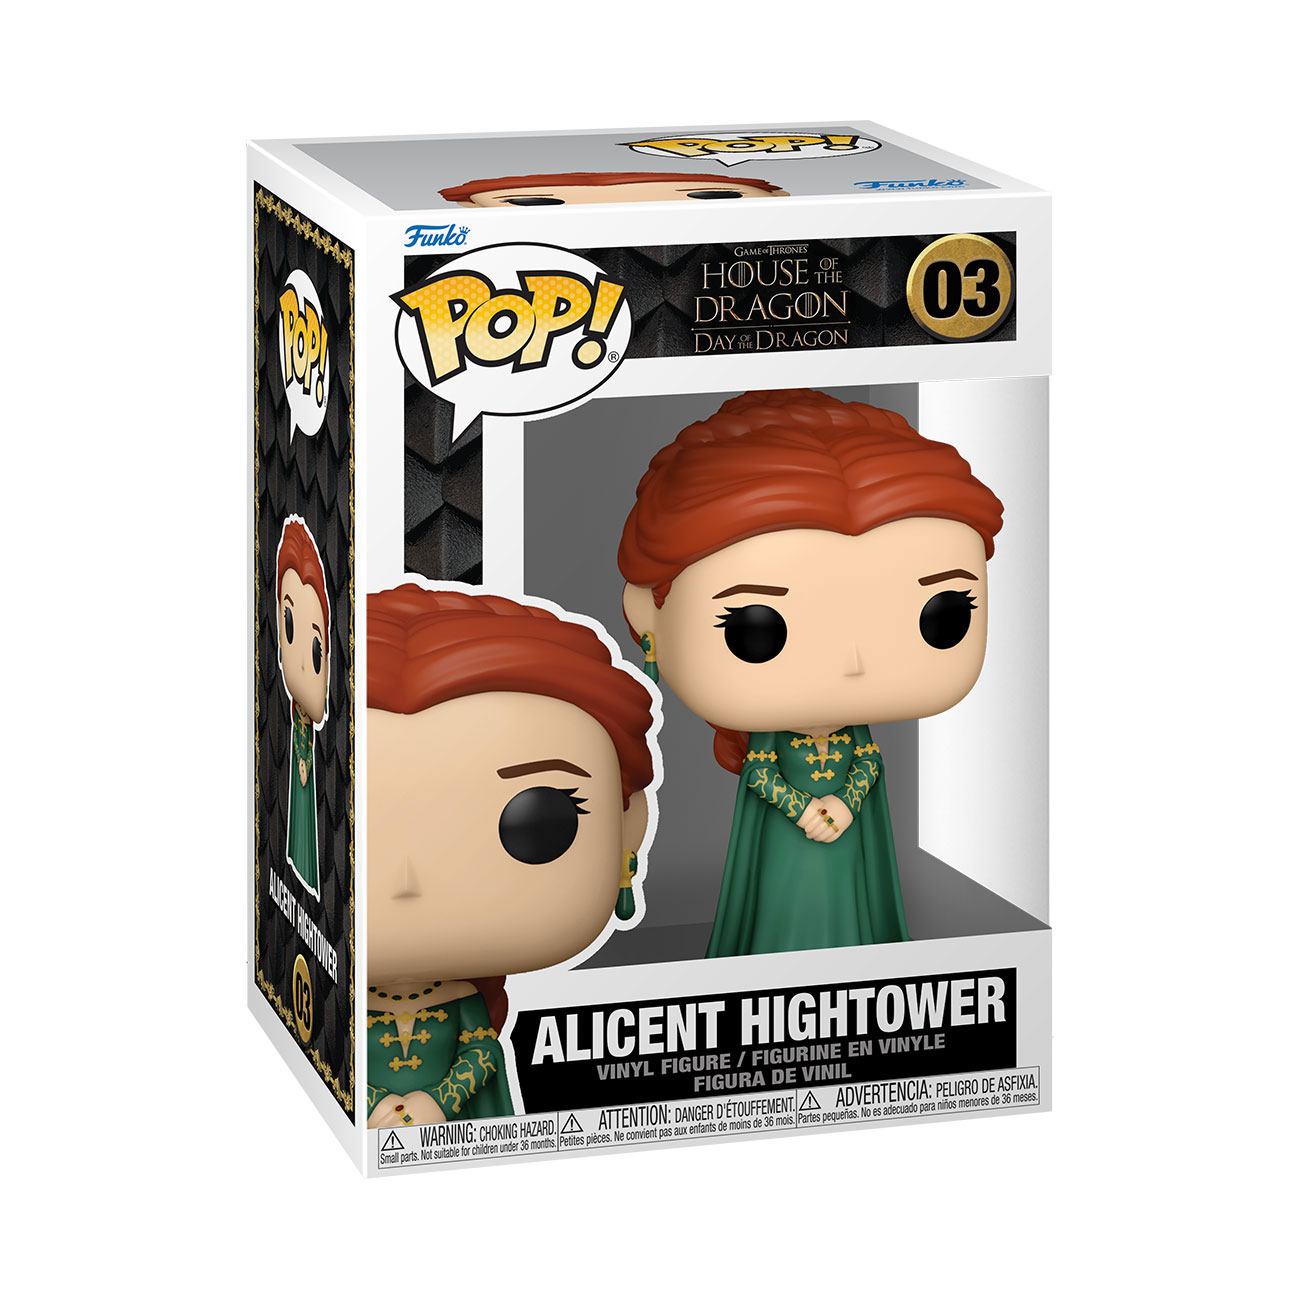 Funko POP! House of the Dragon - Alicent Hightower - 03